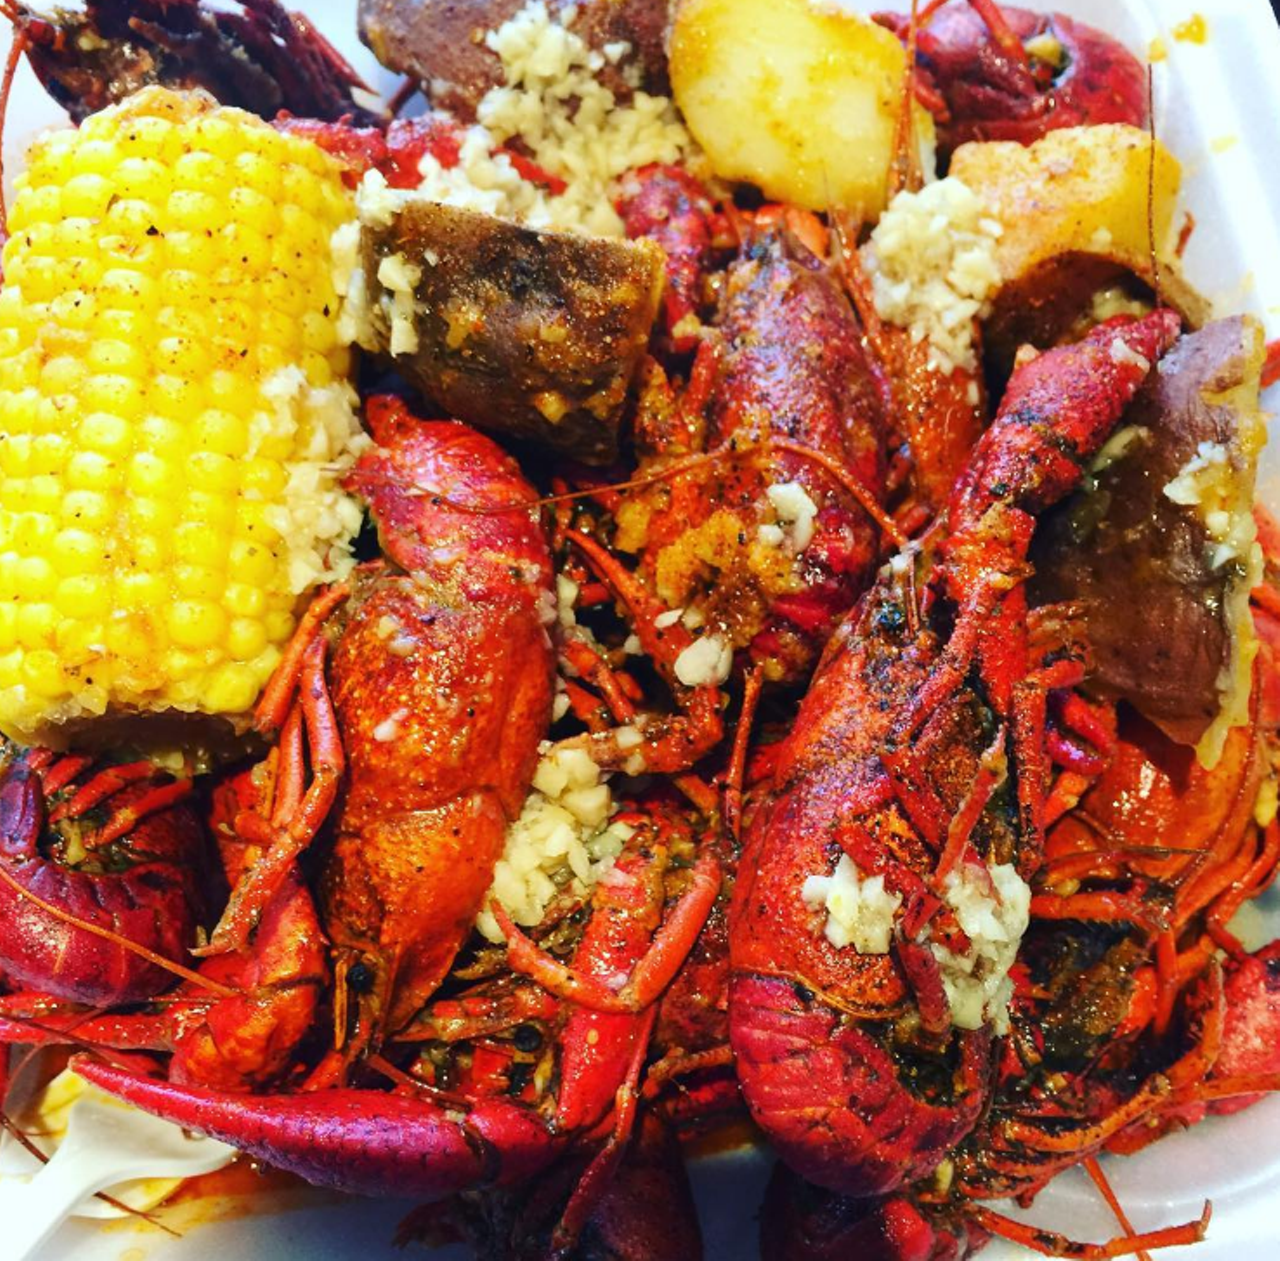 King Cajun Crawfish
924 N. Mills Ave. | 407-704-8863
It's a guarantee that a King Cajun meal will leave your fingers stained with cayenne and drenched in spicy buttery garlic. The crawfish rules these lands, but a bowl of gumbo is another great option. 
Photo via jsmoove_616/Instagram